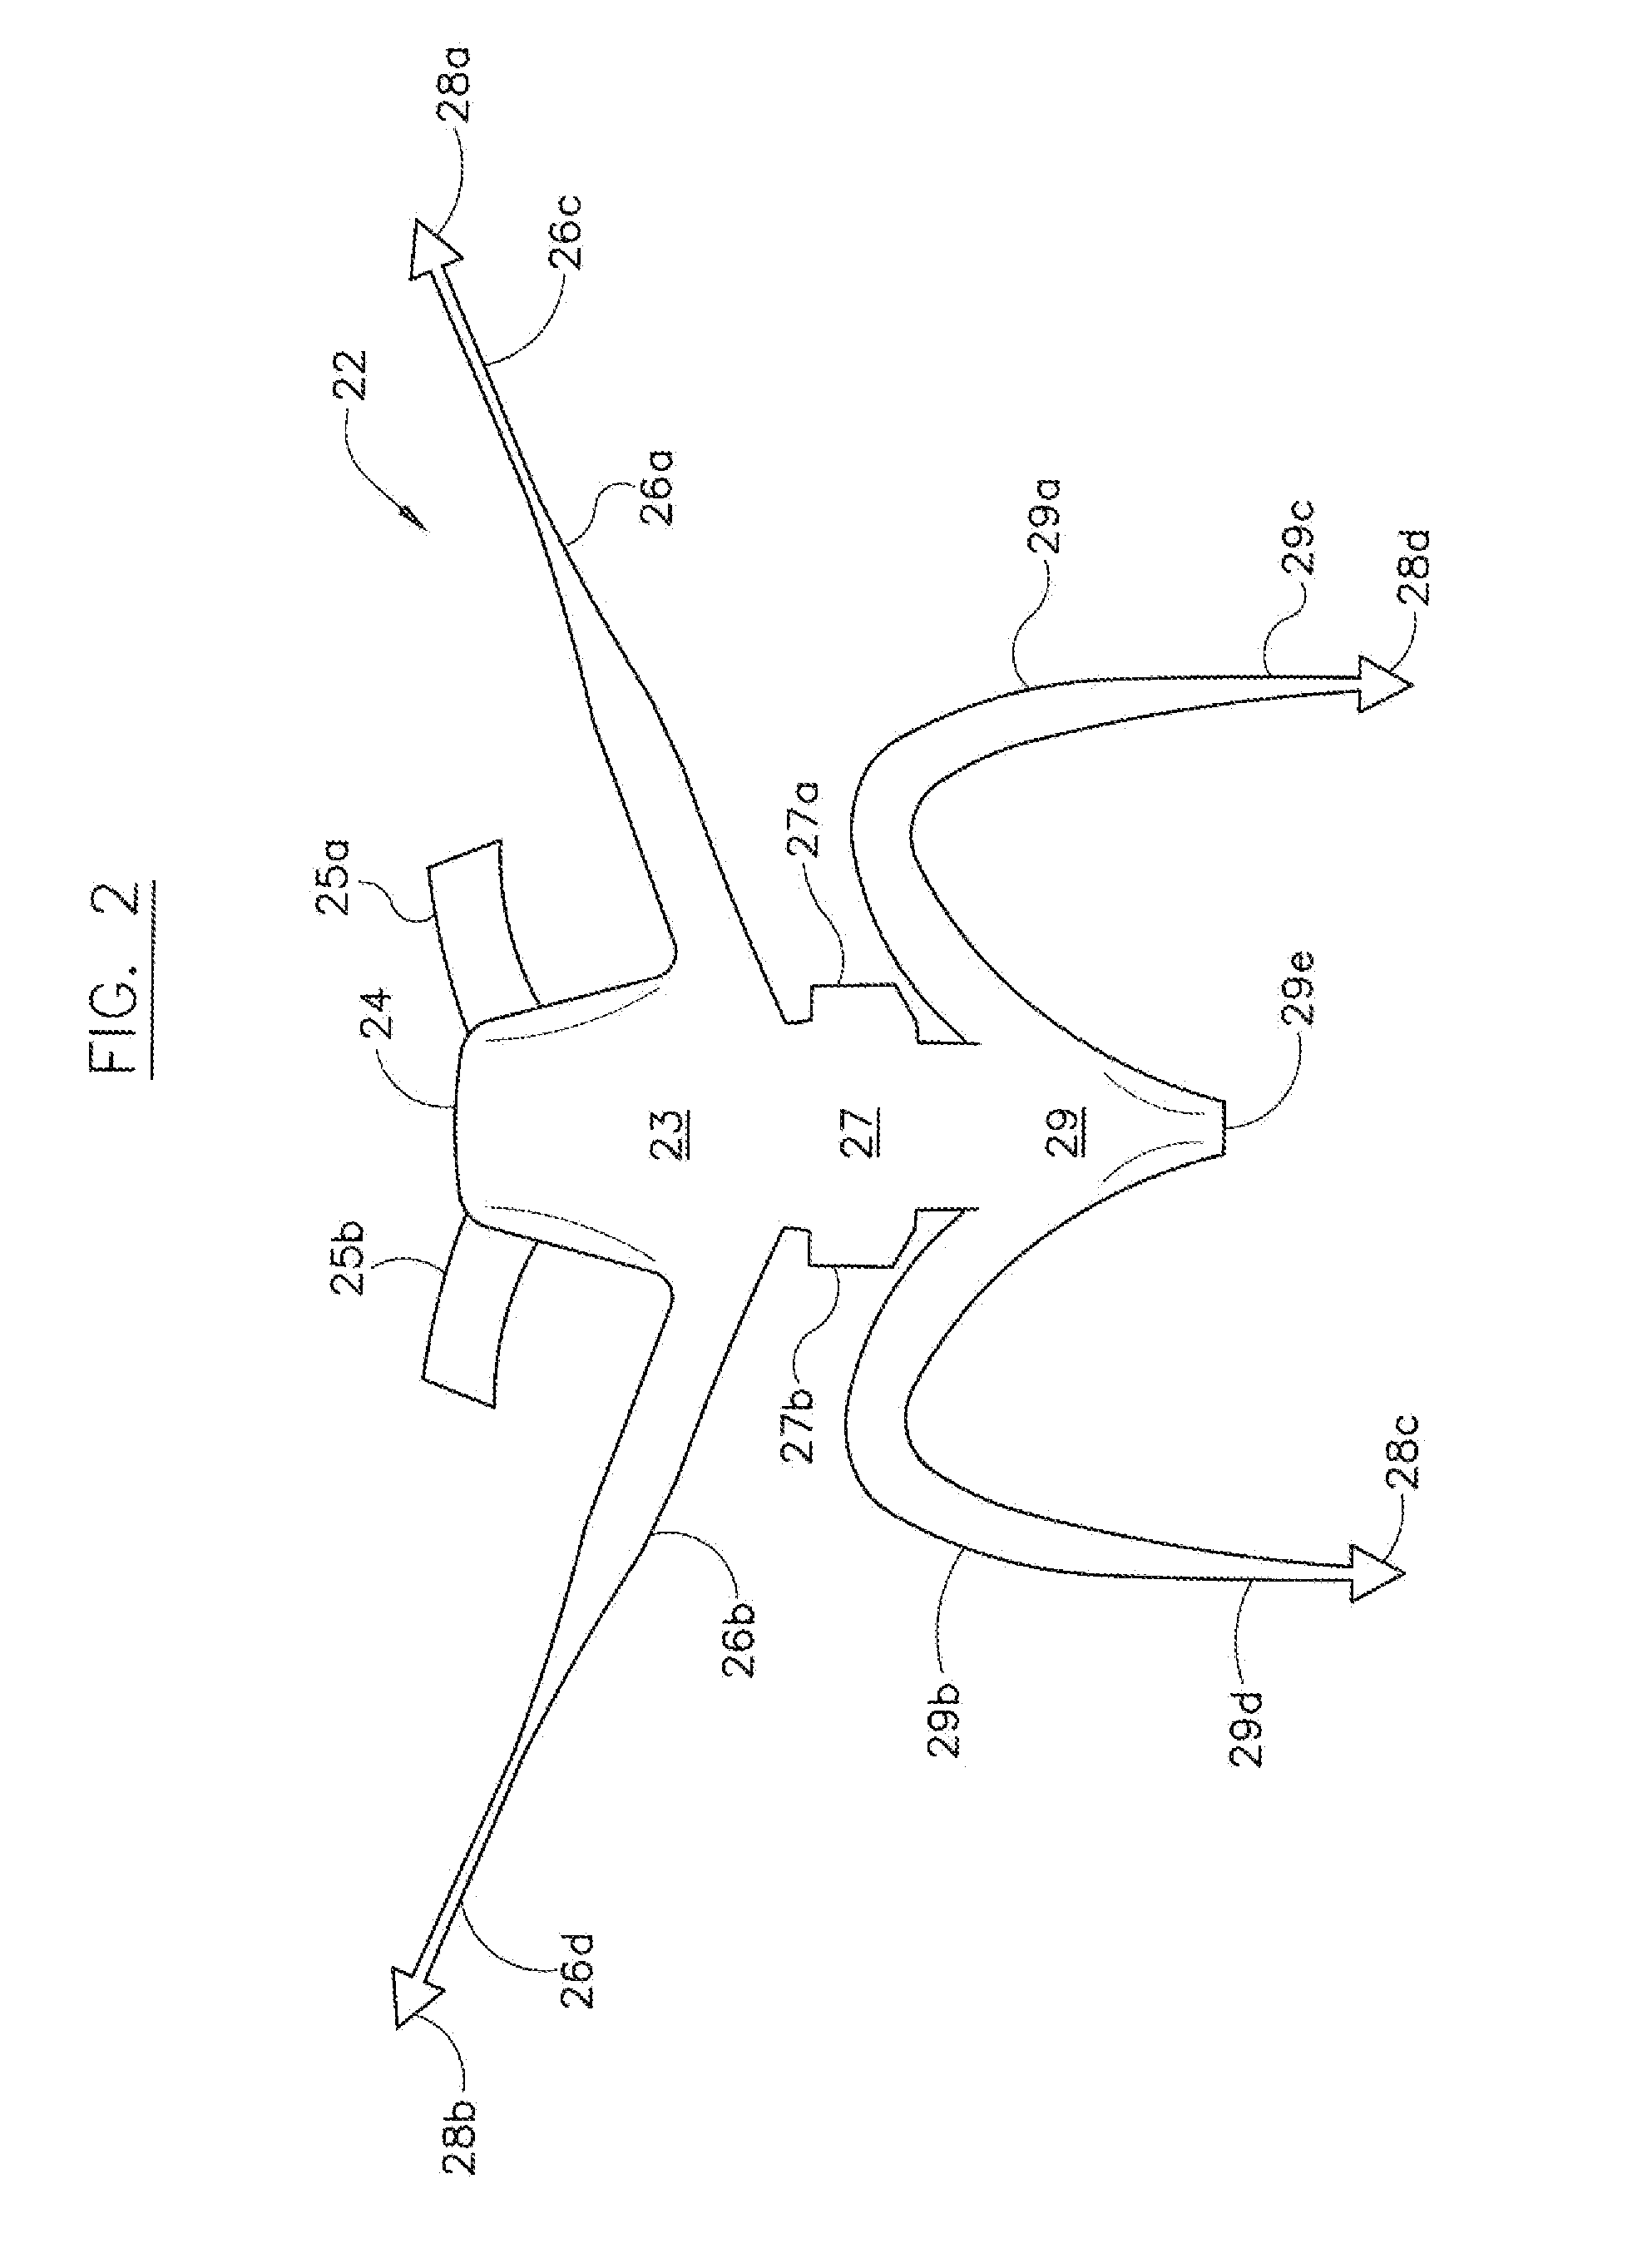 Apparatus For Treating Vaginal Prolapse